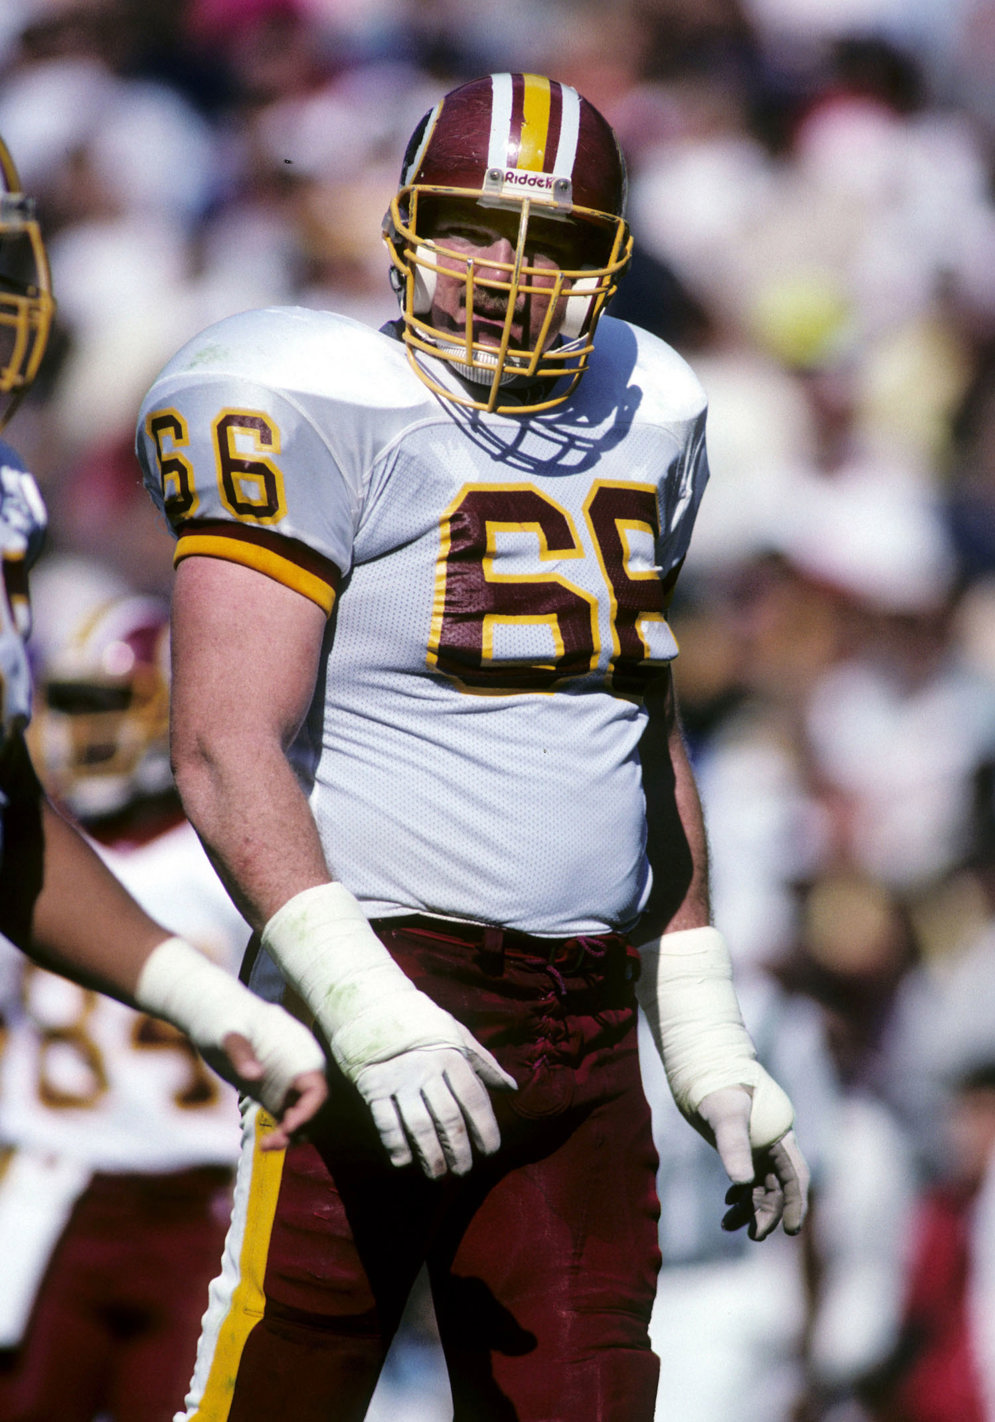 Washington Commanders offensive tackle Joe Jacoby was a giant among men, but he actually had to bulk up to make it in the NFL. (AP Photo/Al Messerschmidt)